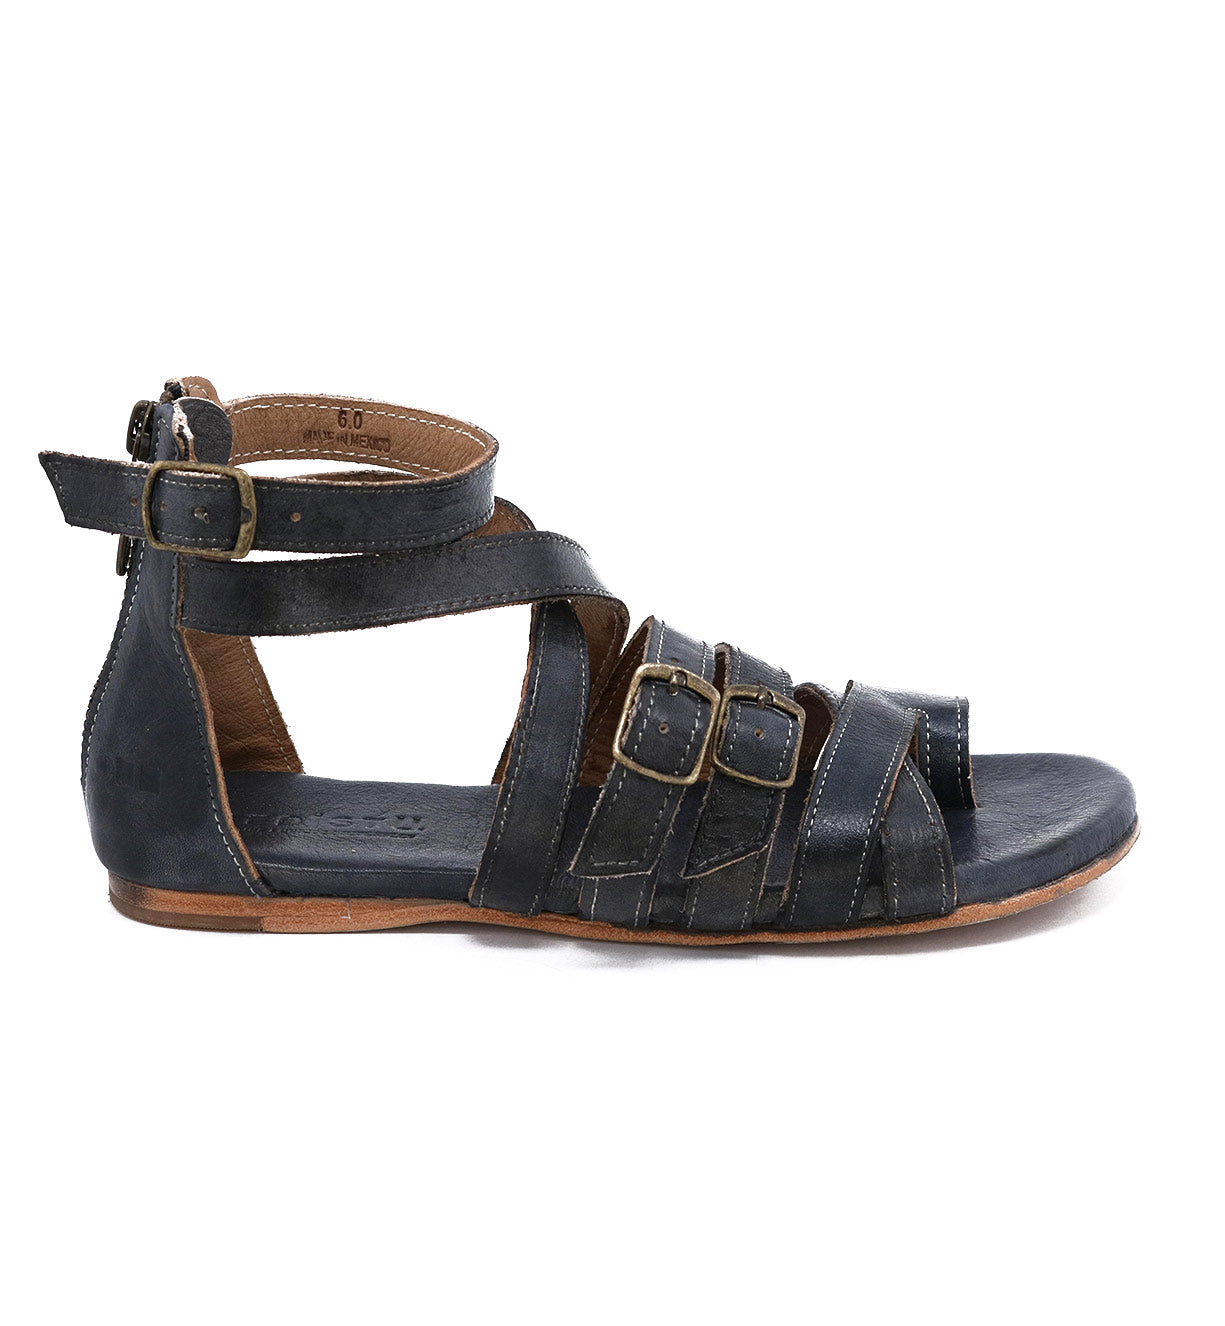 A women's Miya black leather sandal by Bed Stu with straps and buckles.